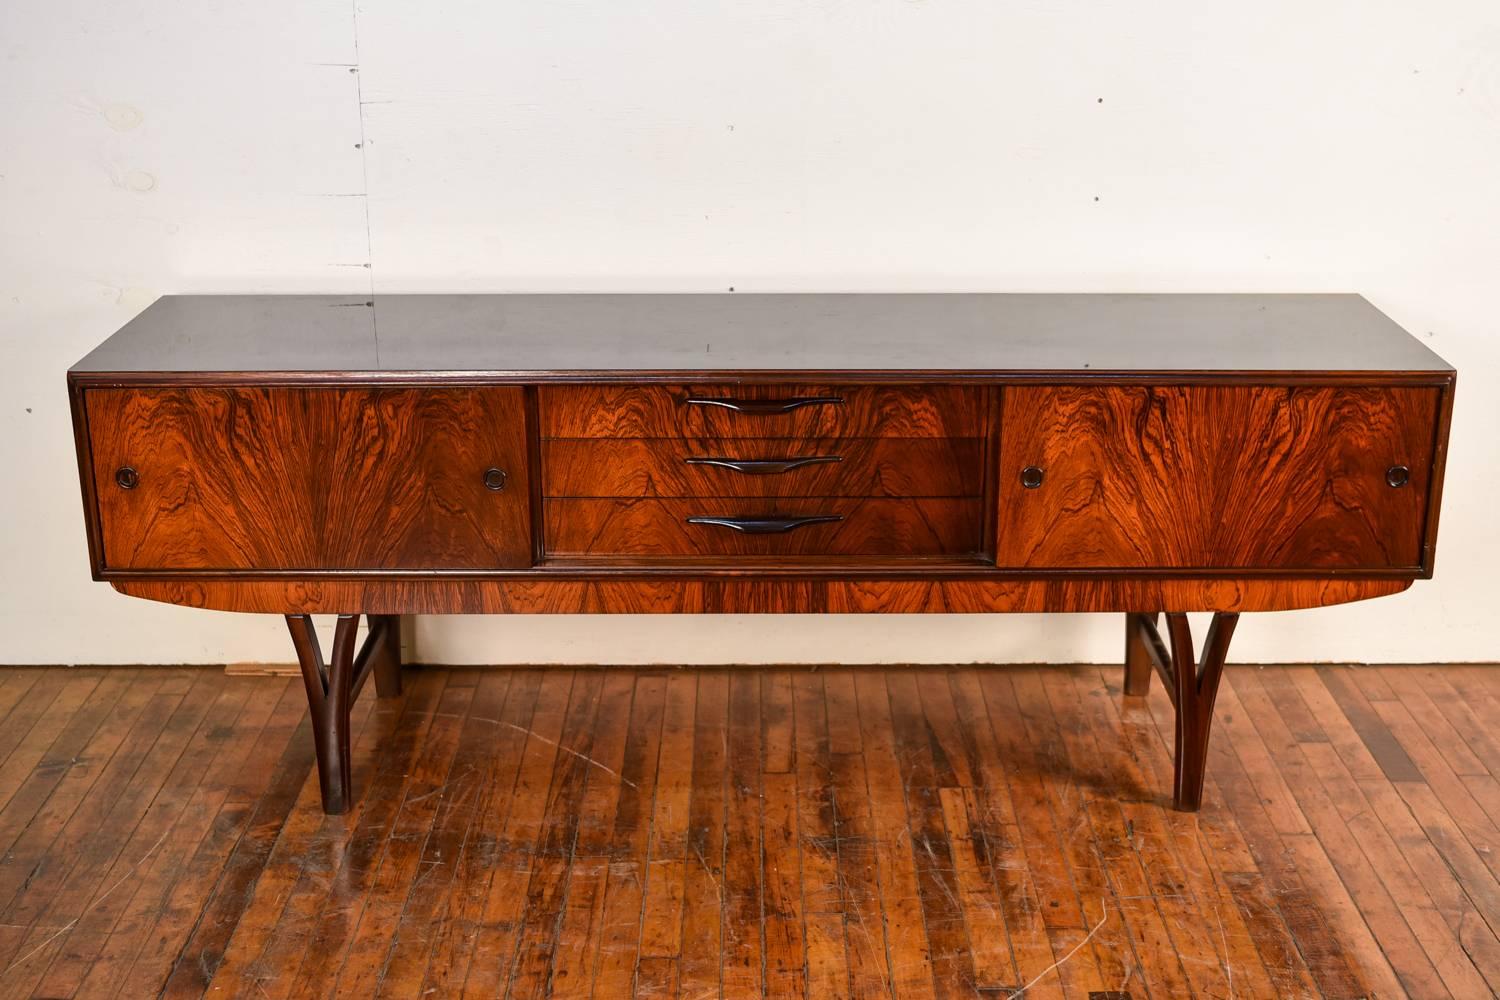 A stunning Danish midcentury sideboard in rosewood, featuring a black laminate top. The piece has a sliding door on either side with petite circular handles, and three stacked drawers in the centre with elegant handles. The legs of this piece are